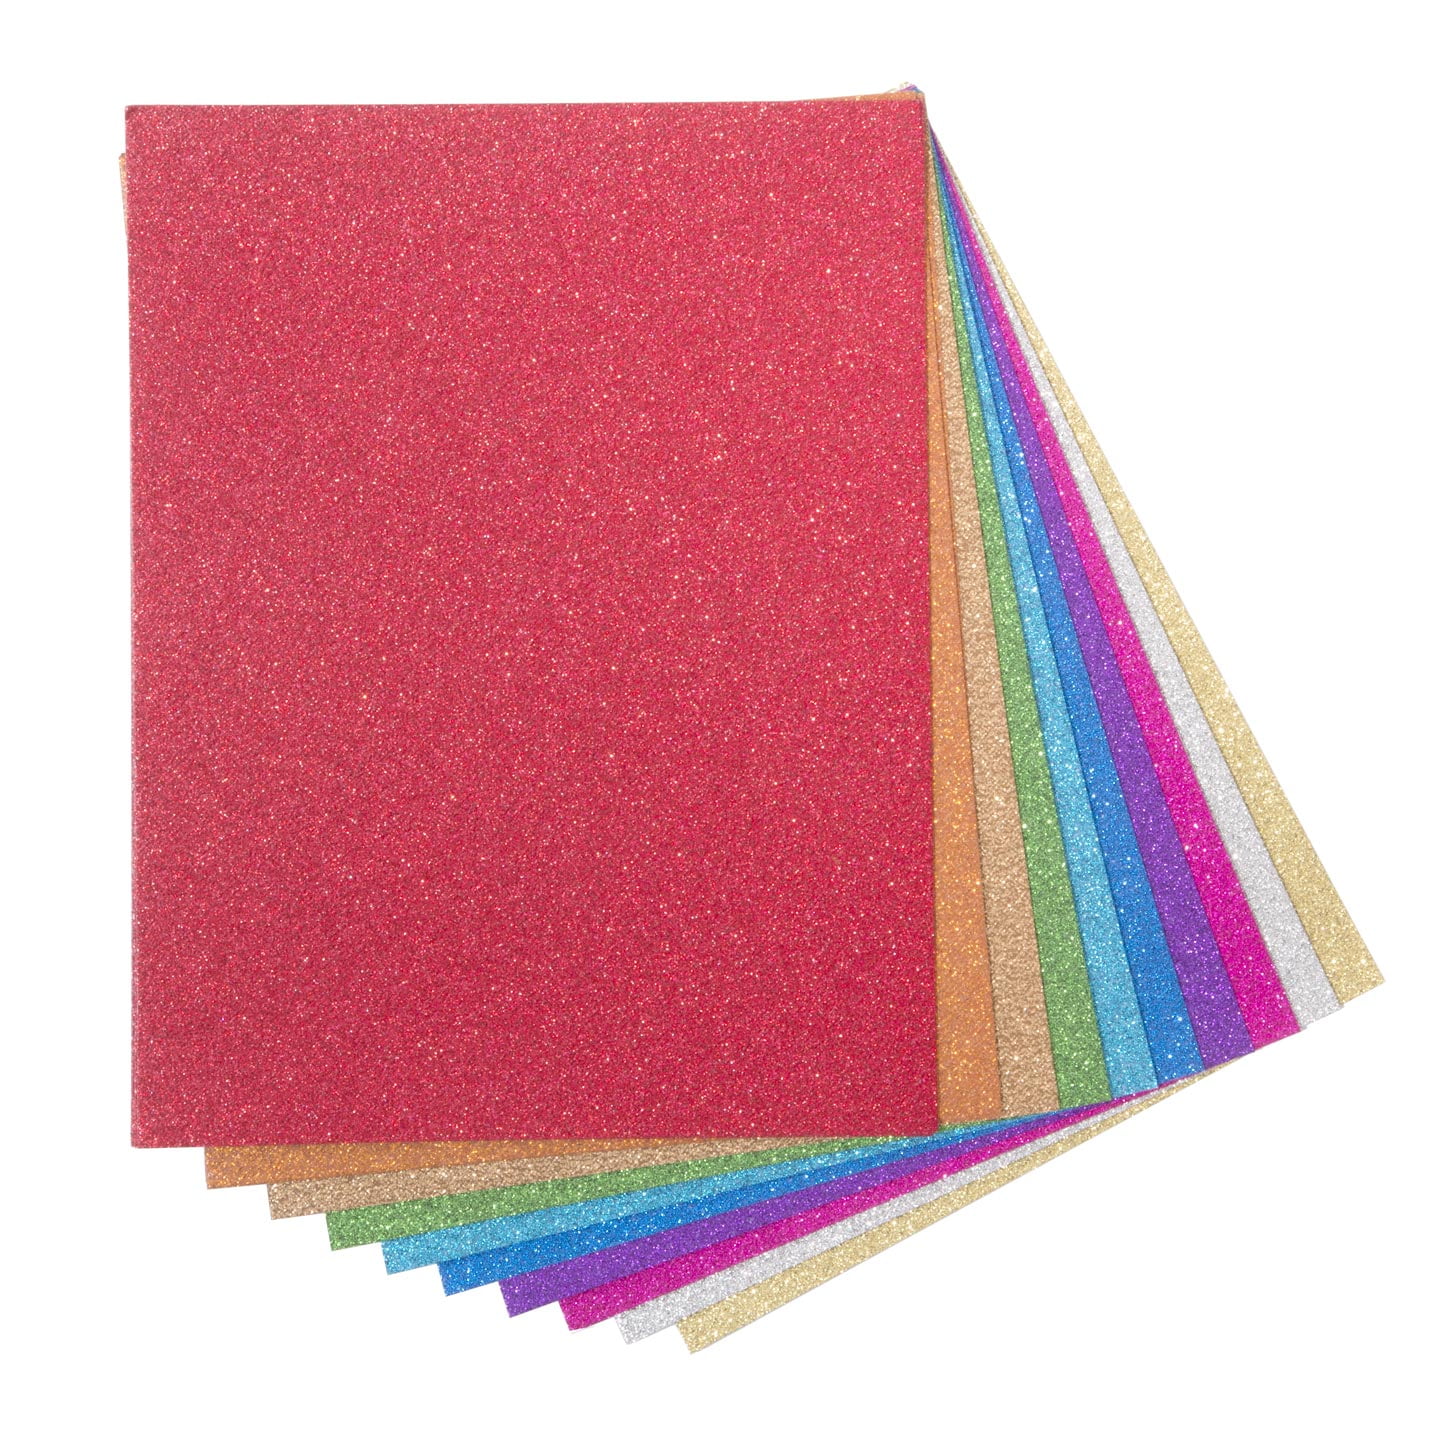 Feast Cards 10 Colors Wedding Birthday Decoration AIEX 10 Sheets Glitter Craft Paper Mixed Colors Glitter Cardstock Paper Soft Touch Sparkle Paper for Crafts Making A4 Size 